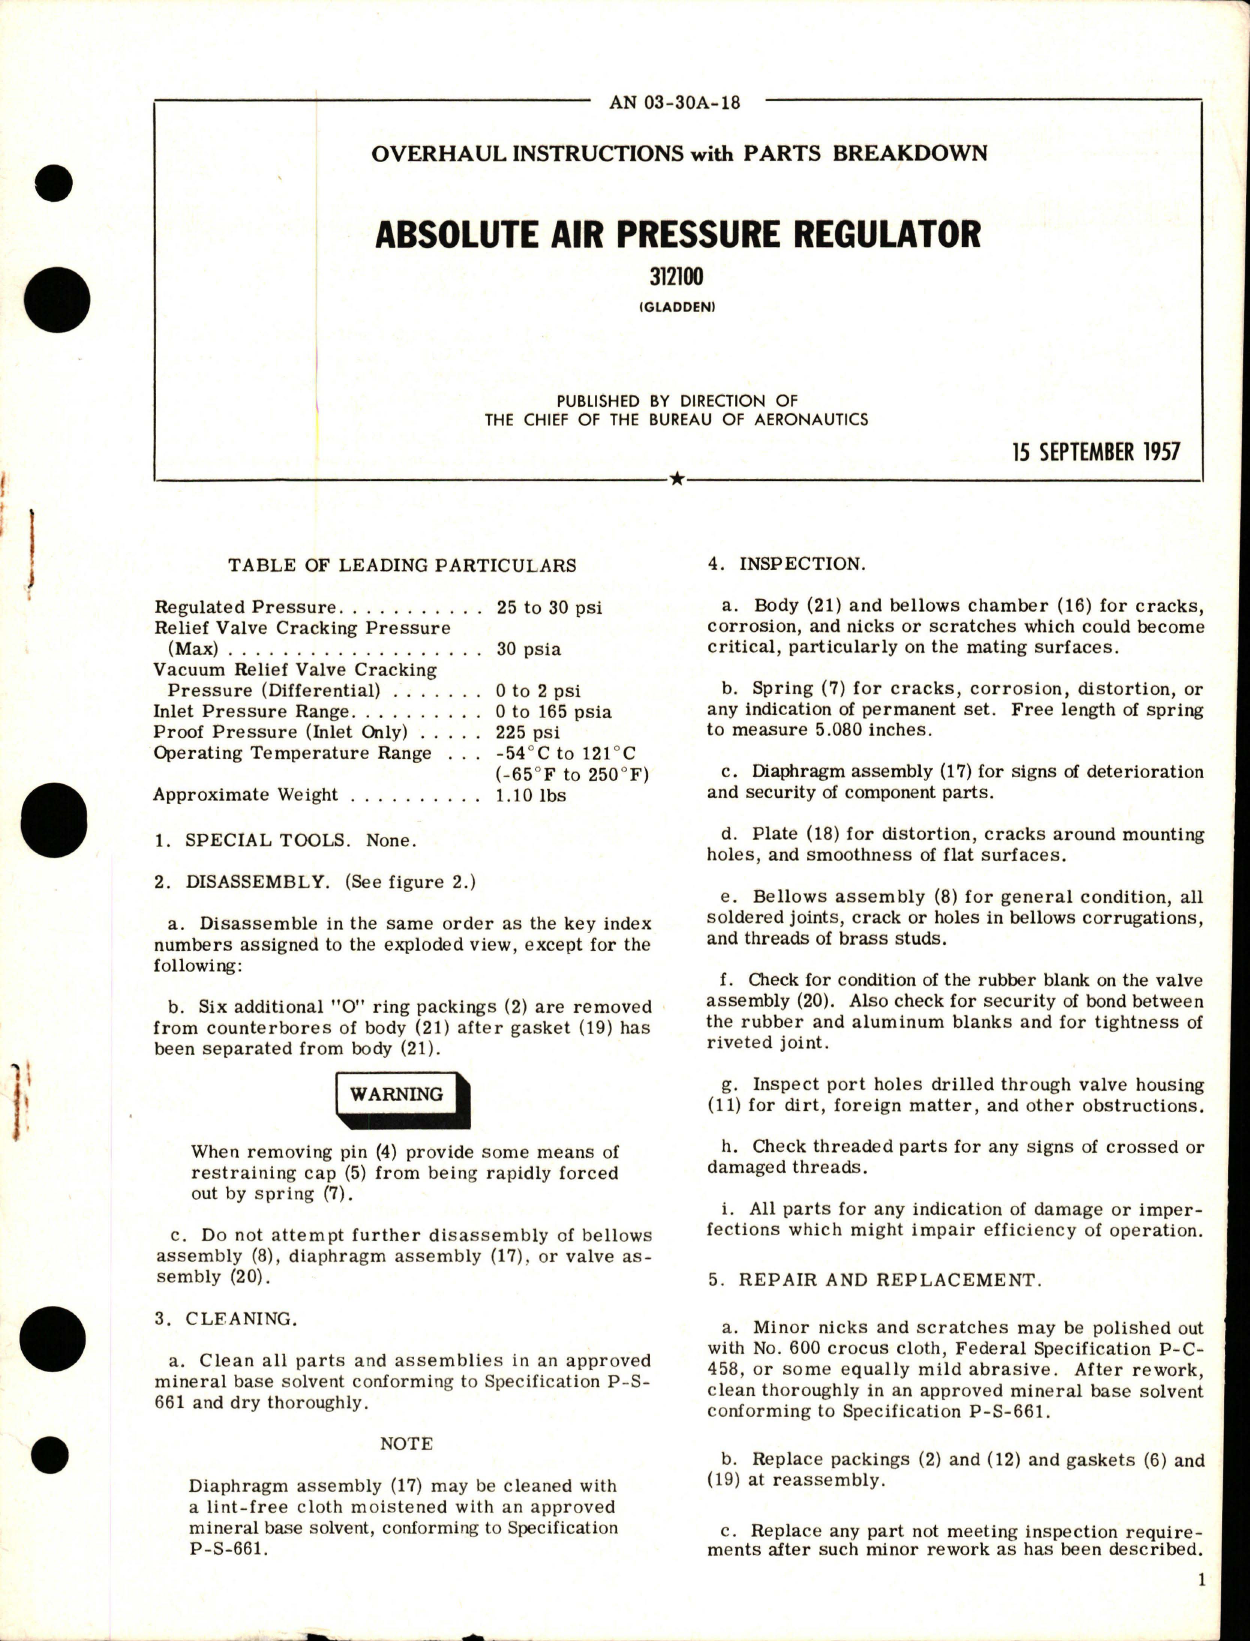 Sample page 1 from AirCorps Library document: Overhaul Instructions with Parts Breakdown for Absolute Air Pressure Regulator - 312100